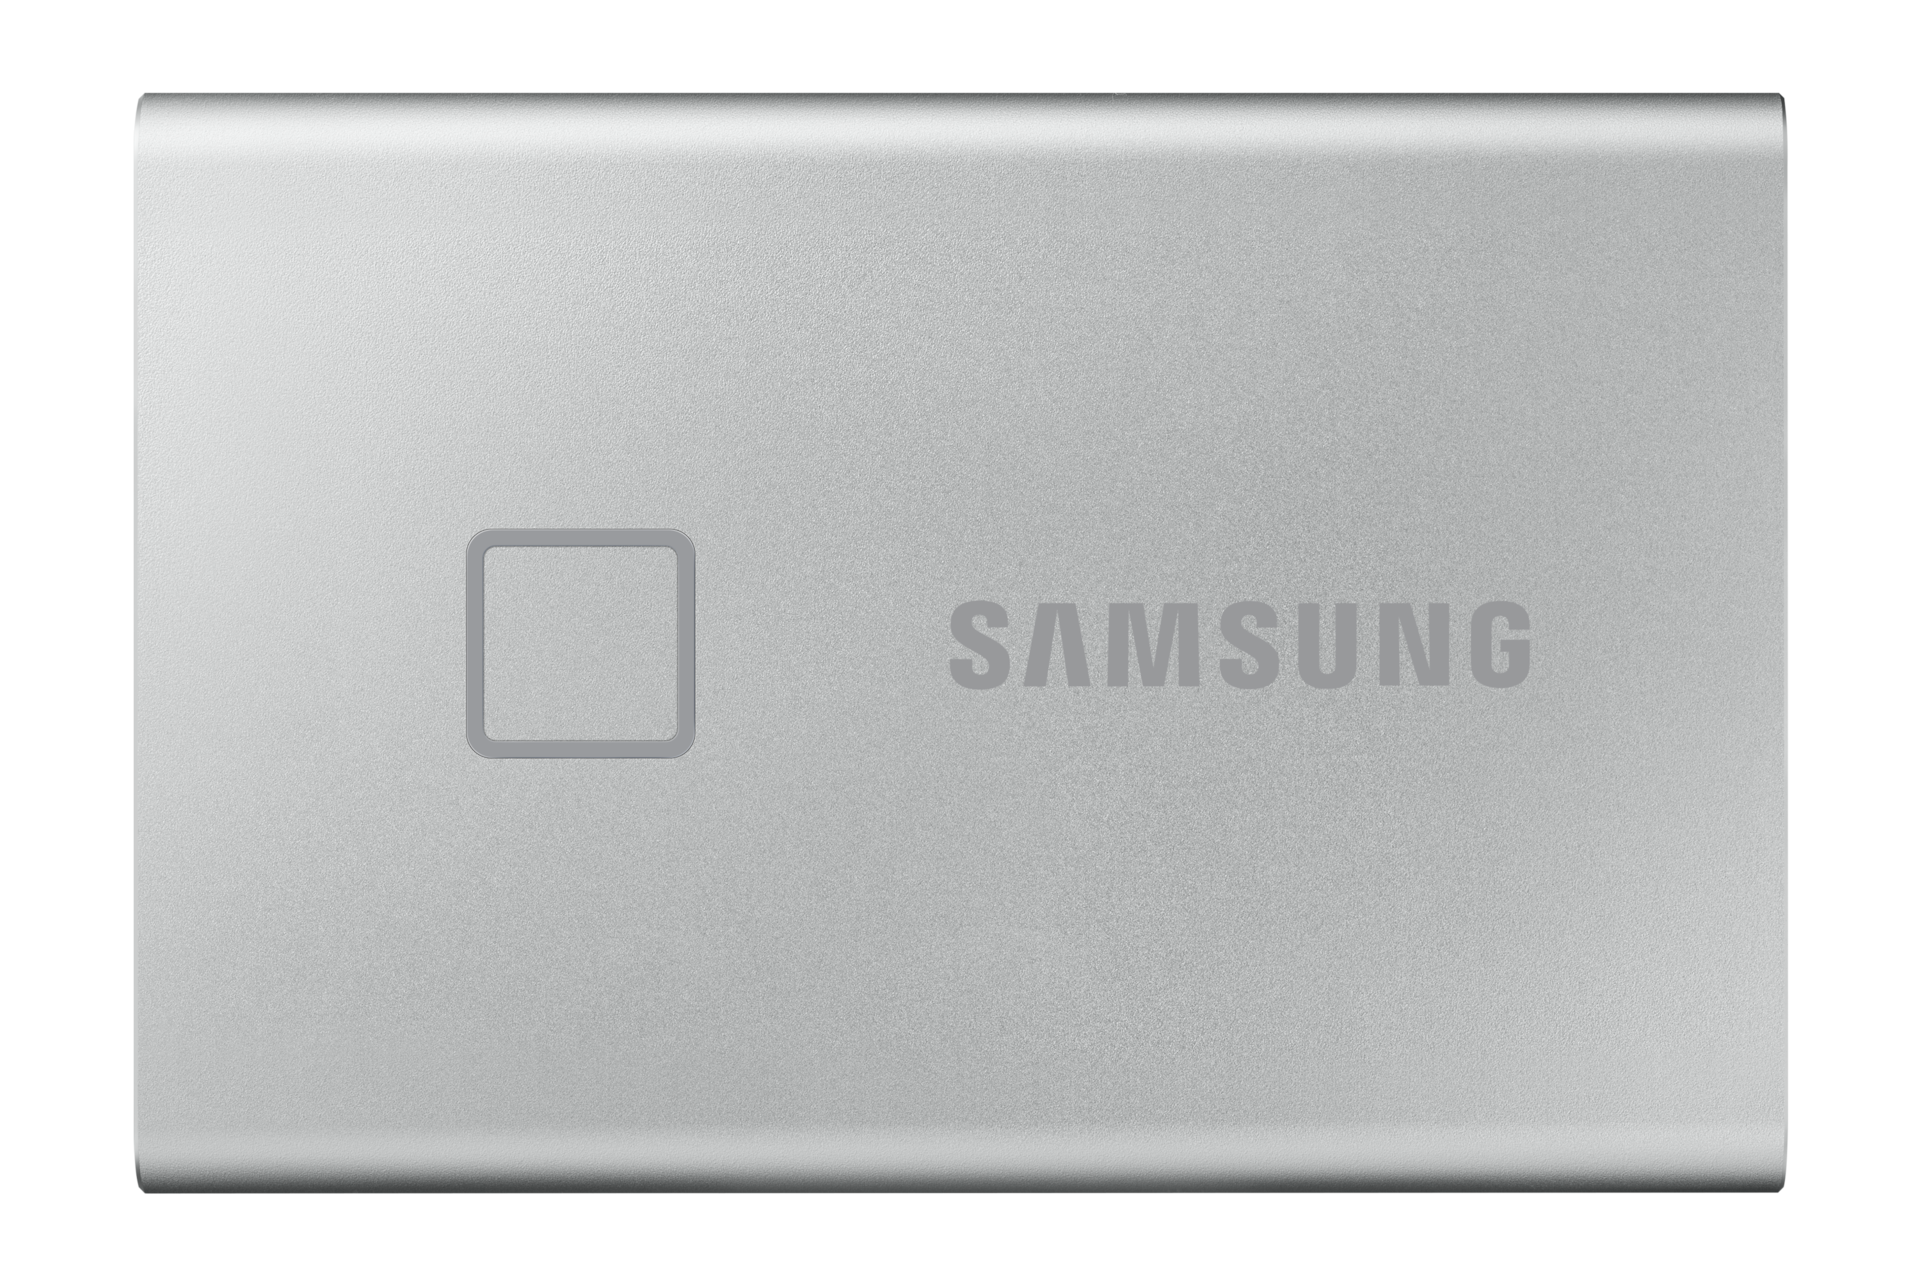 Samsung SSD T7 Touch 500GB - Silver, Silver